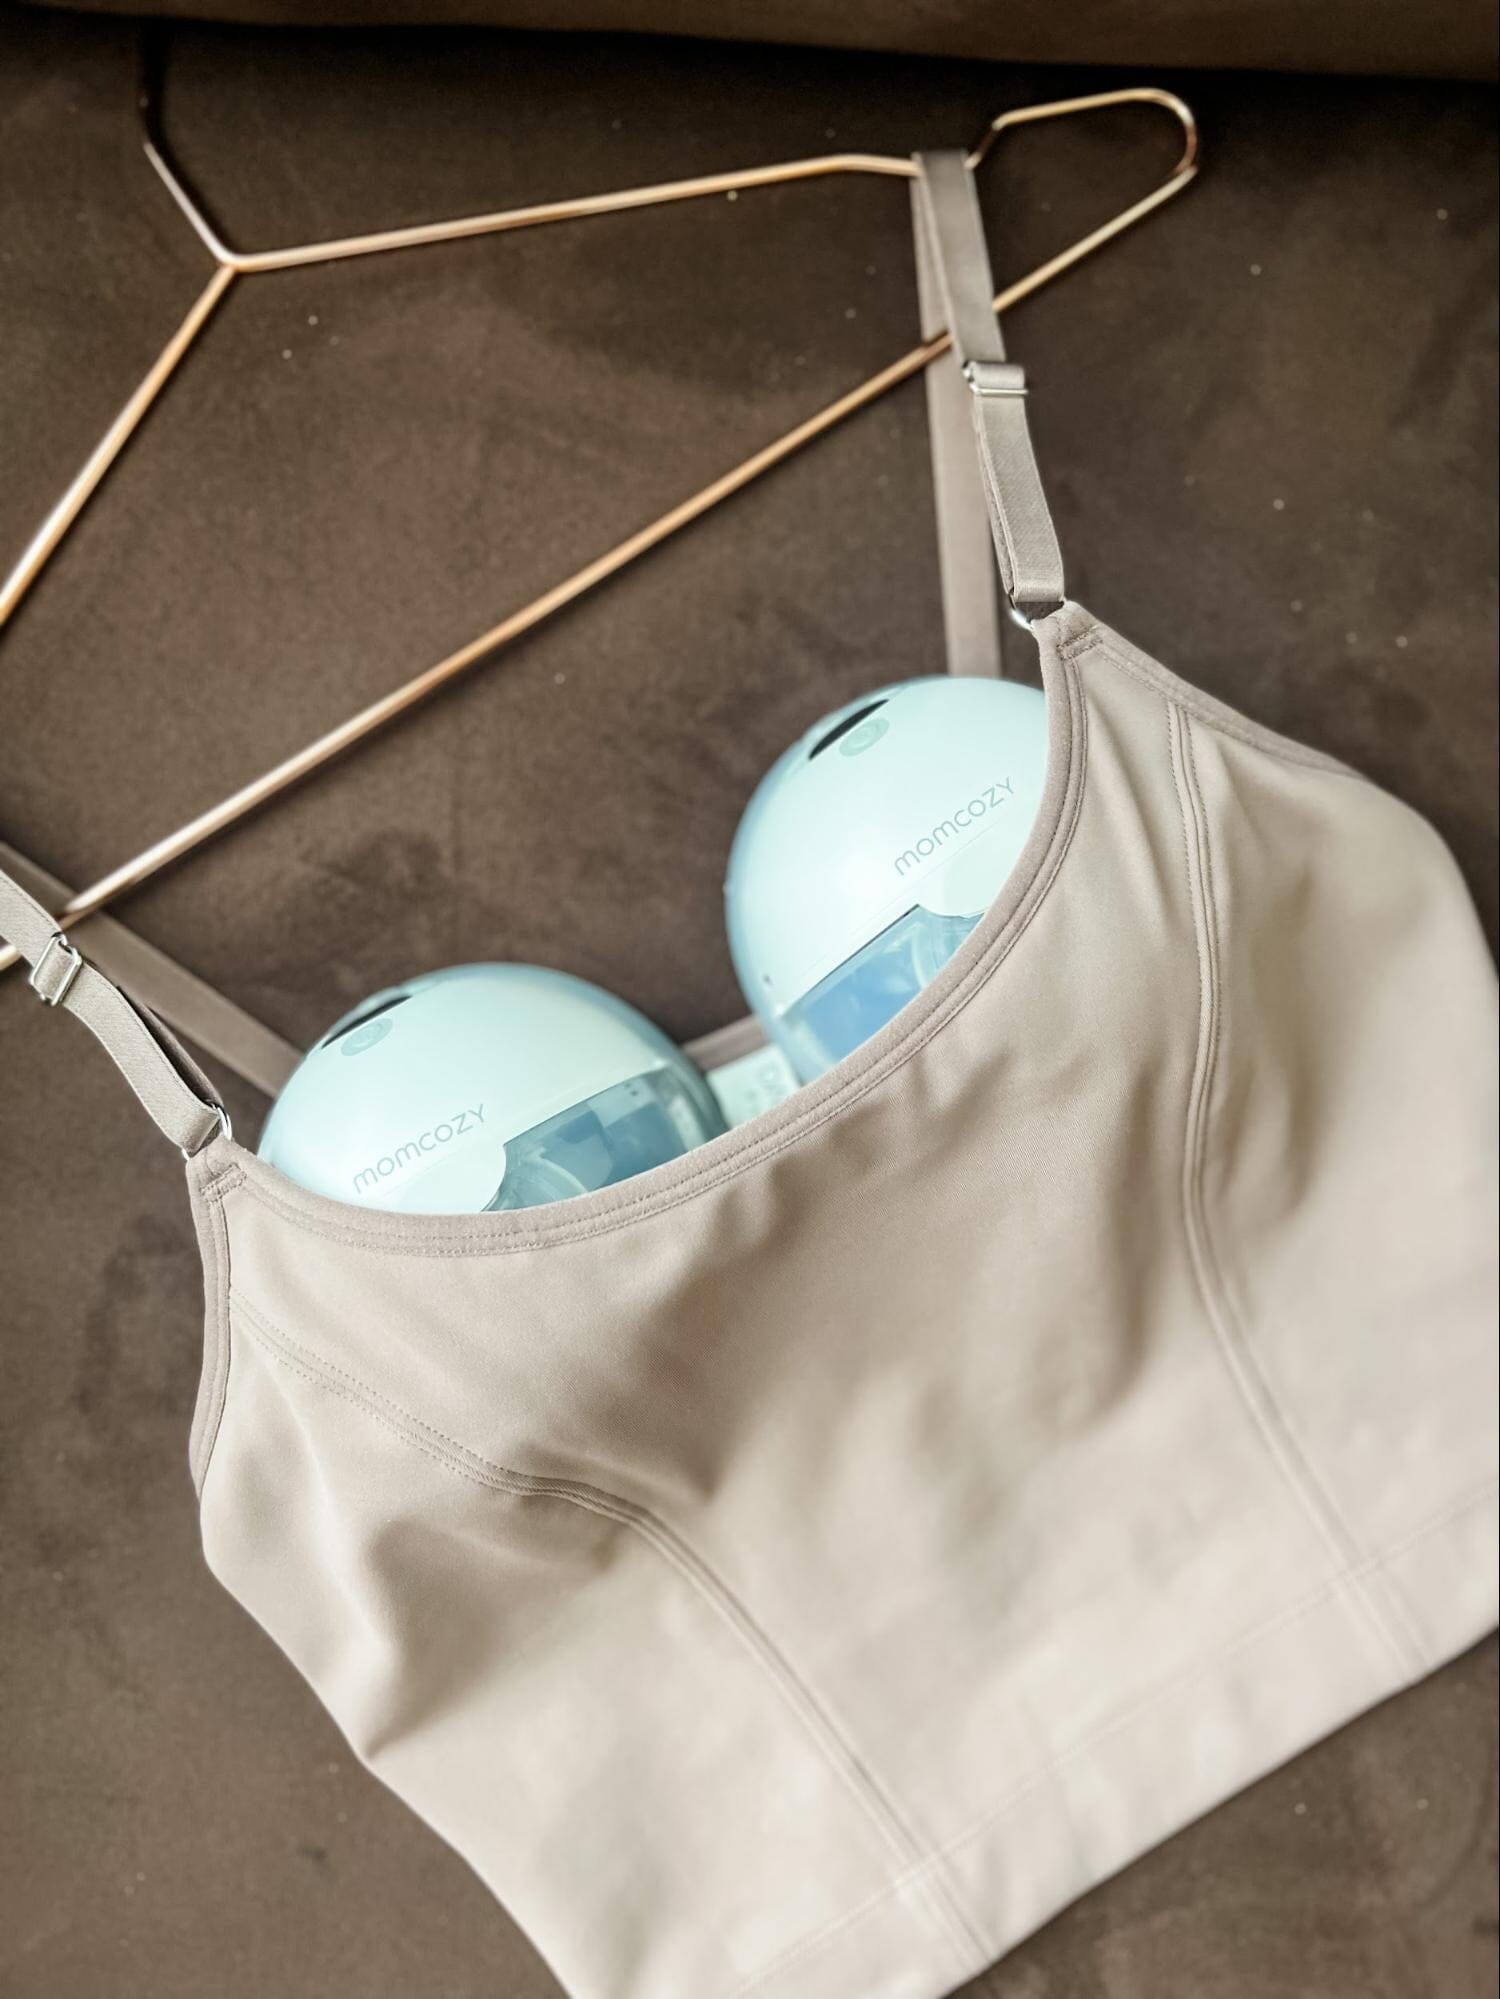 https://www.davinandadley.com/cdn/shop/articles/momcozy-m5-wearable-breast-pump-review-the-perfect-pumping-option-for-modern-moms-366765.jpg?v=1692130192